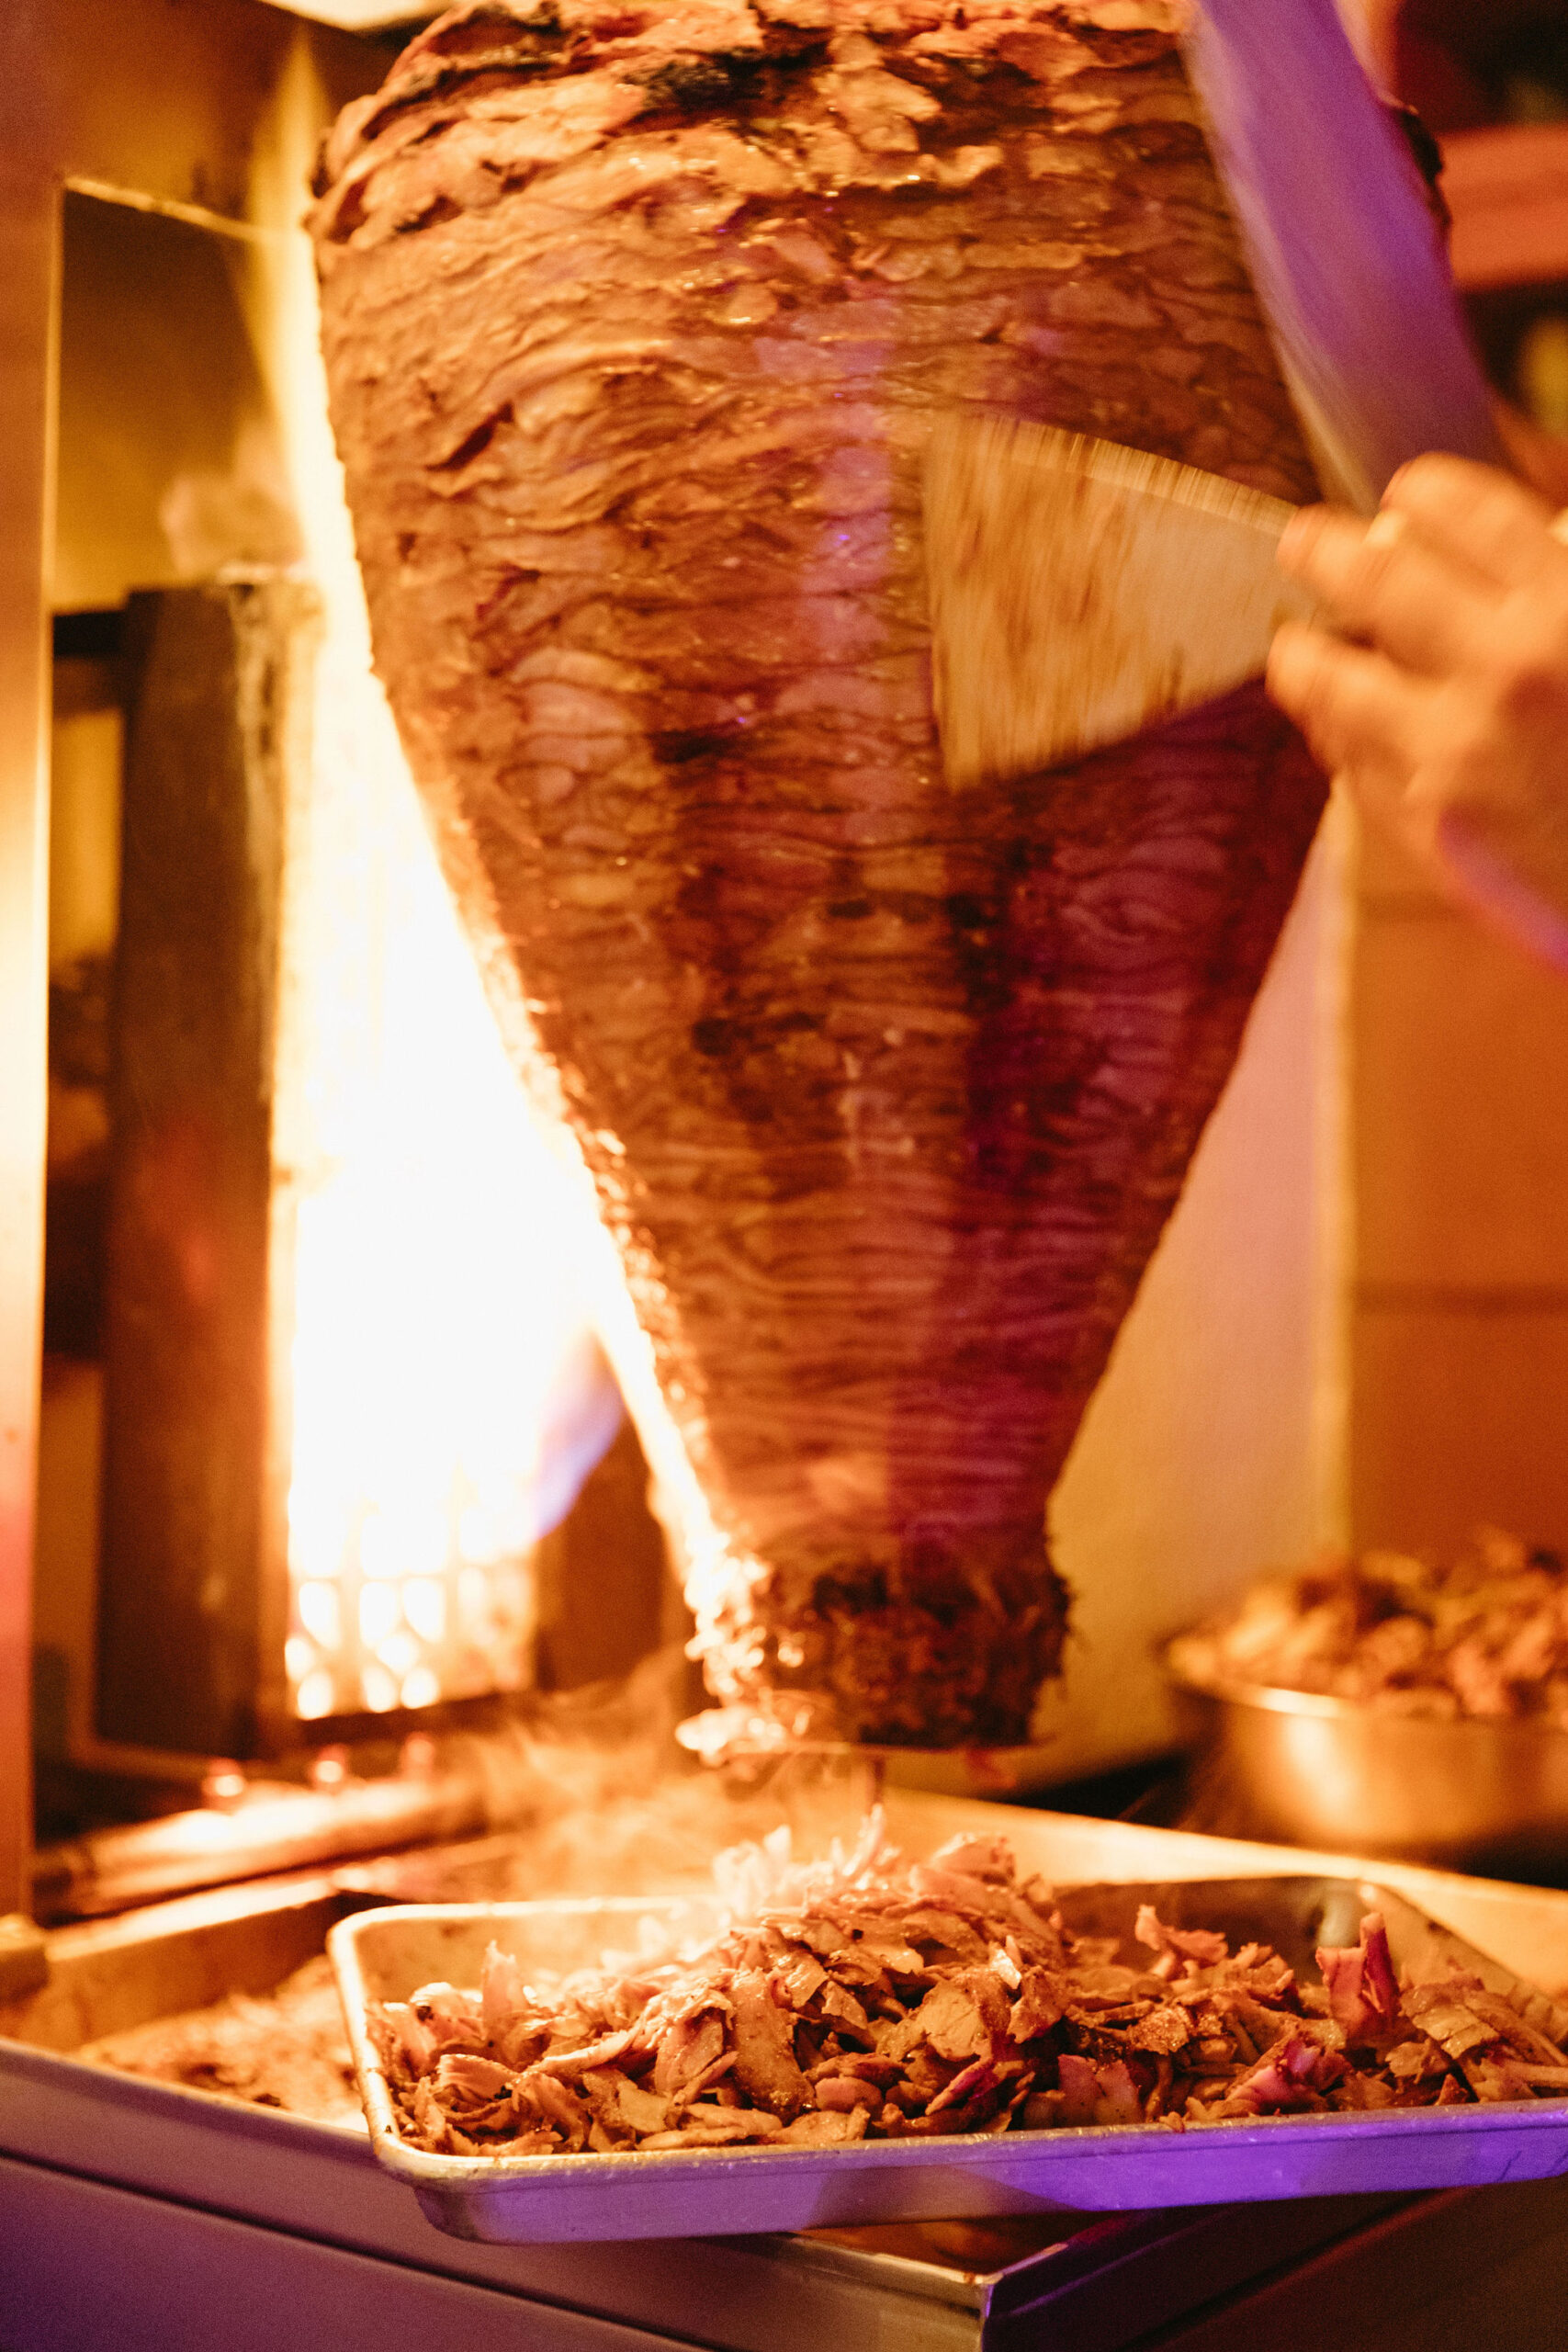 Al pastor on spicket and hand carving pork shavings onto tray at night with bright lighting from fire. 